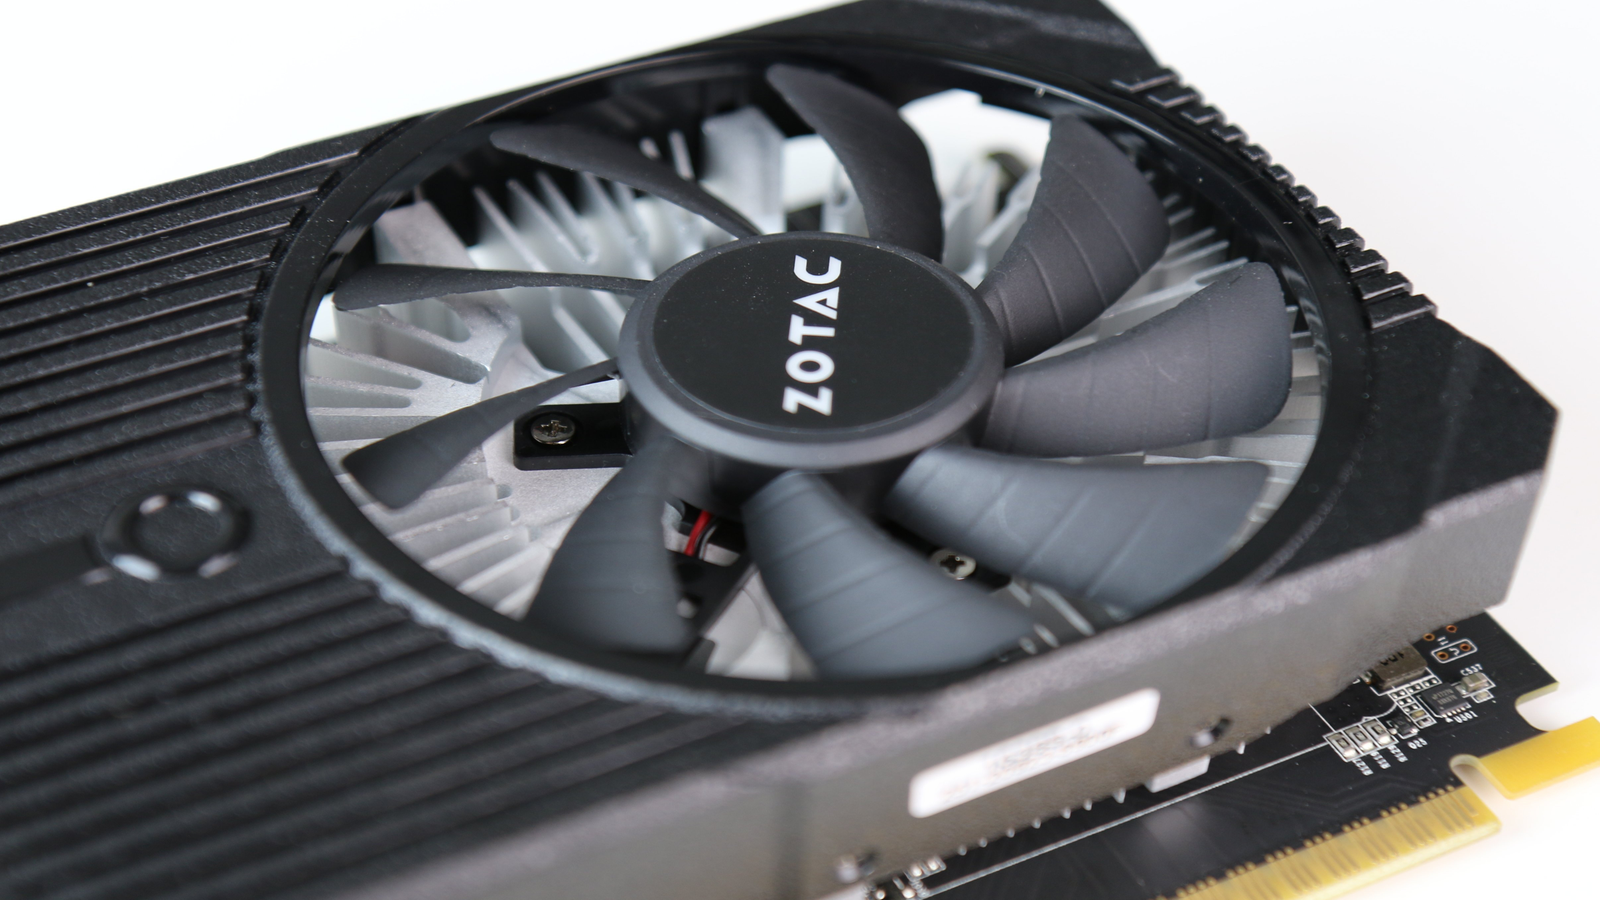 AMD doesn't recommend using a GTX 1060 with frame-rate boosting FSR 2.0